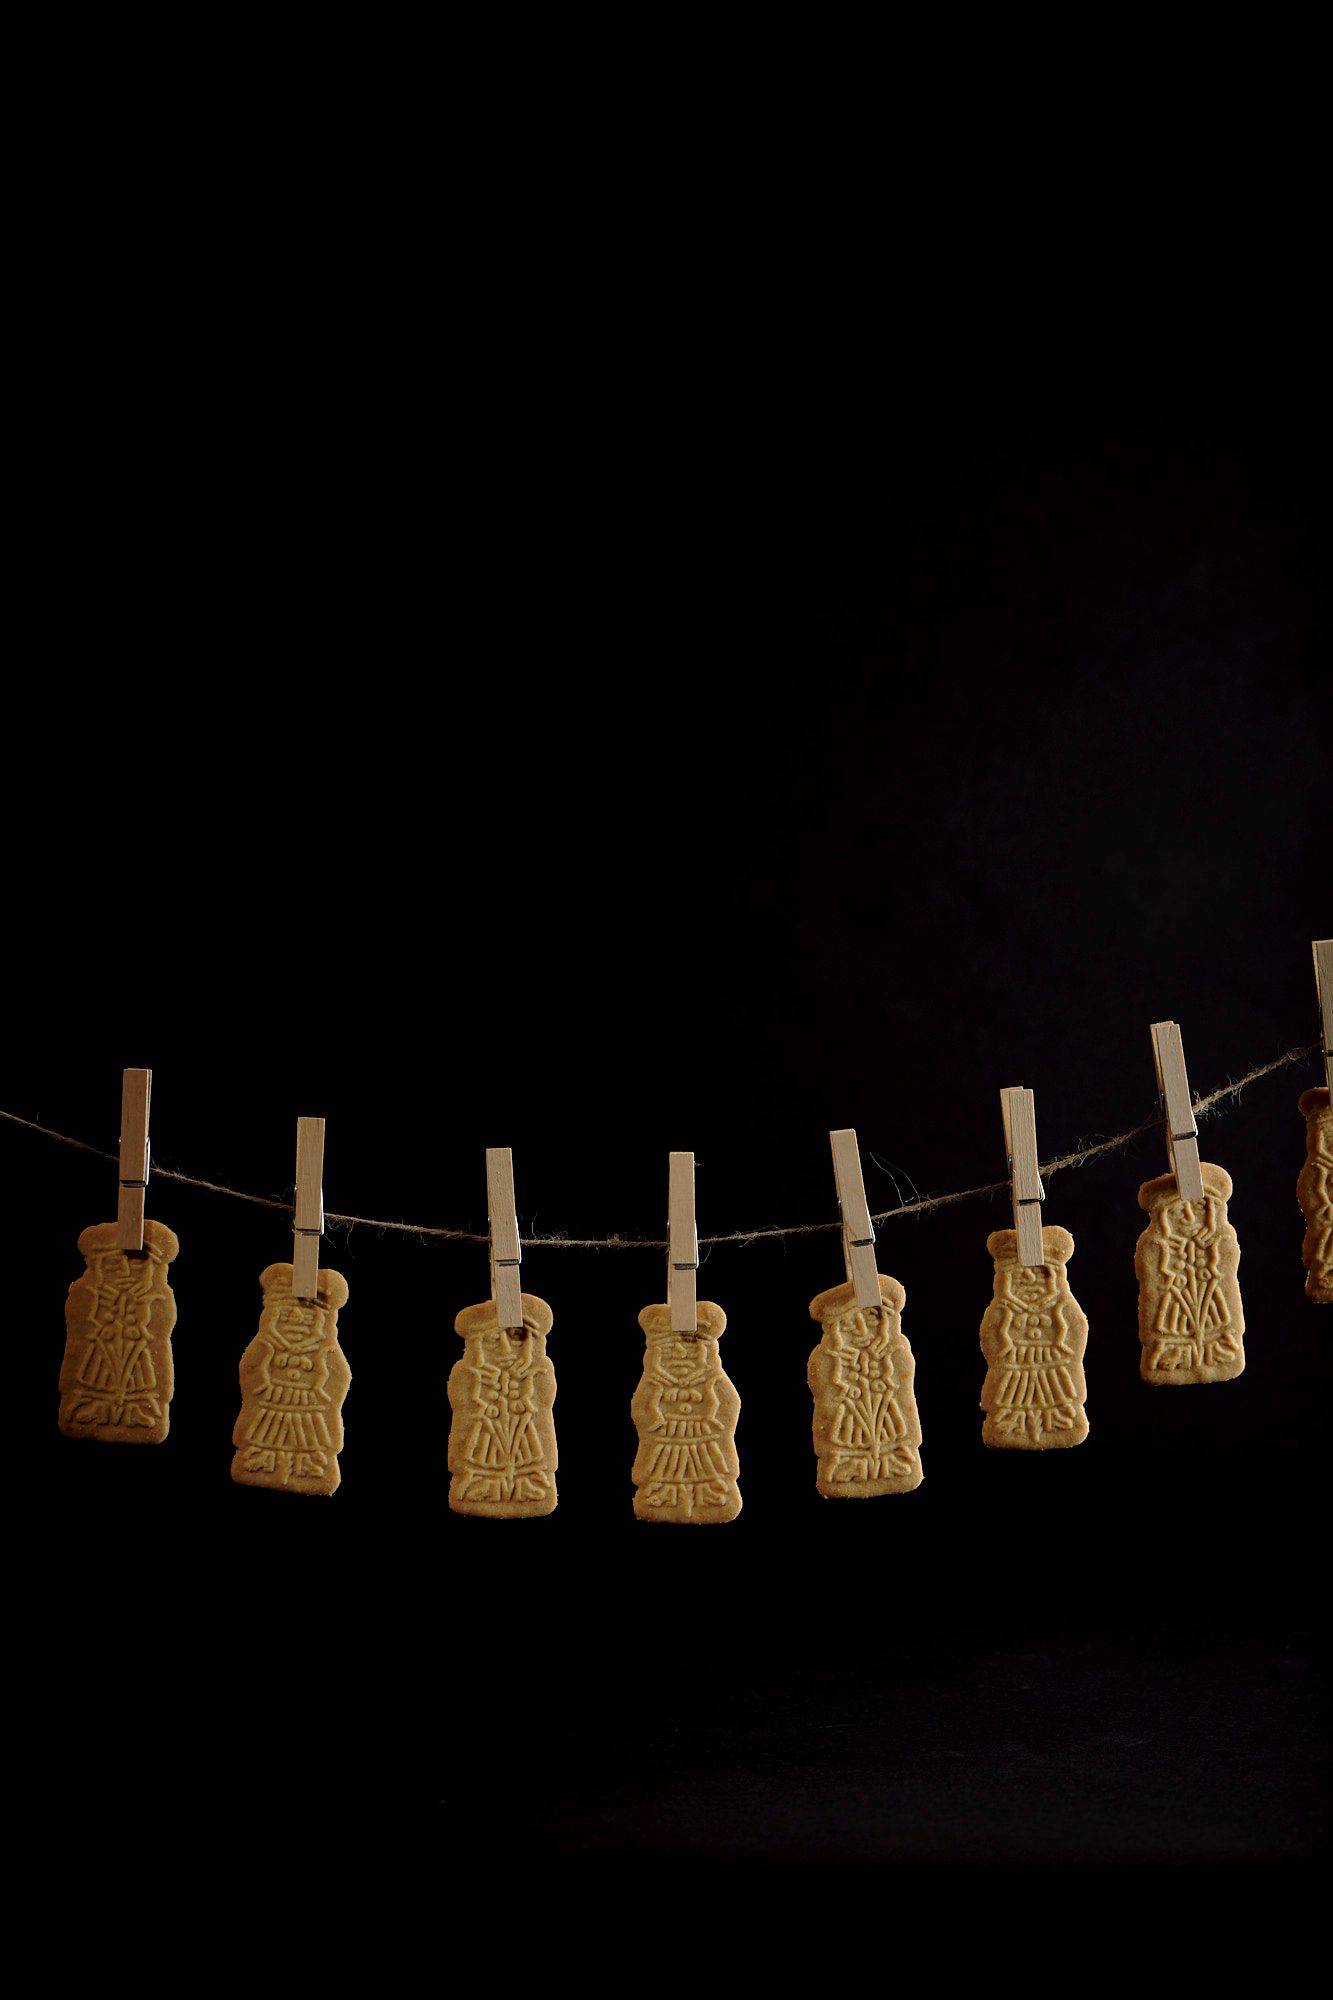 speculoos cookies hanging on a string with black background